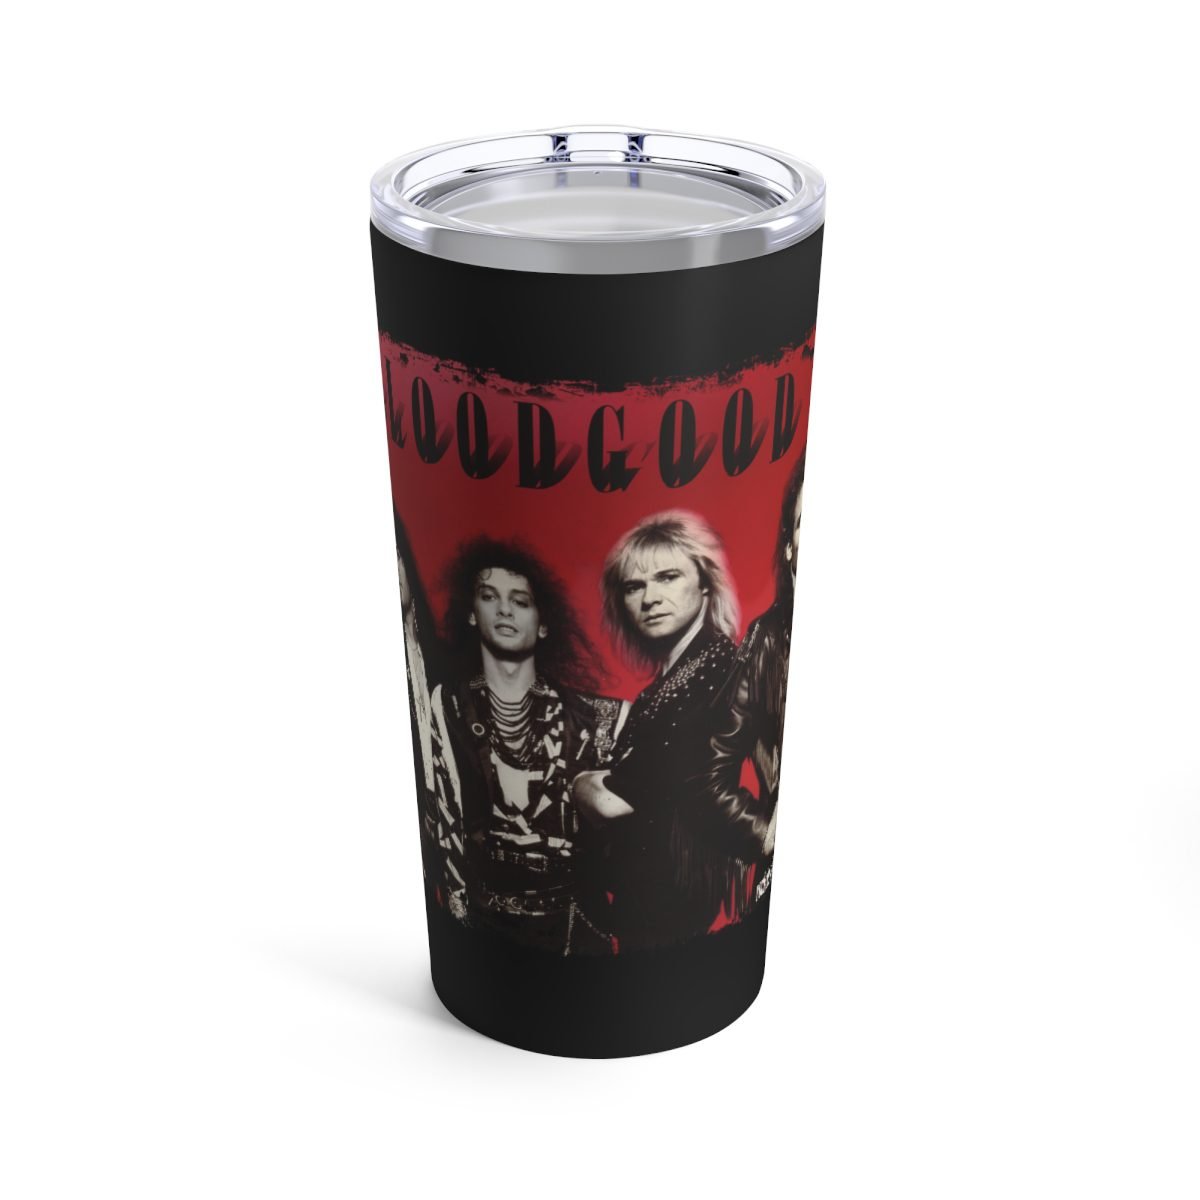 Bloodgood – Rock In A Hard Place 20oz Stainless Steel Tumbler